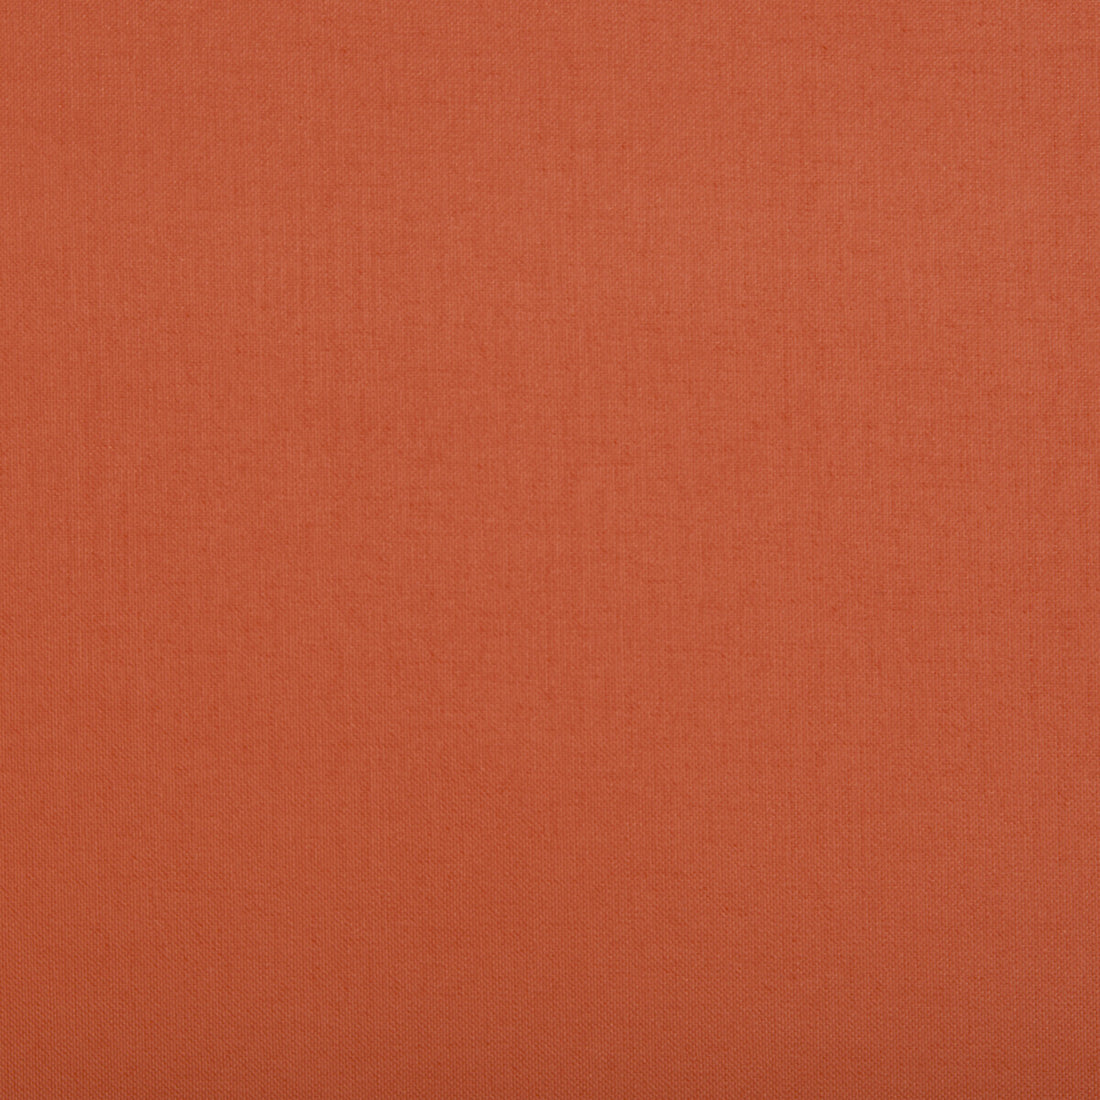 Hulk fabric in paprika color - pattern HULK.9.0 - by Kravet Contract in the Faux Leather Extreme Performance collection